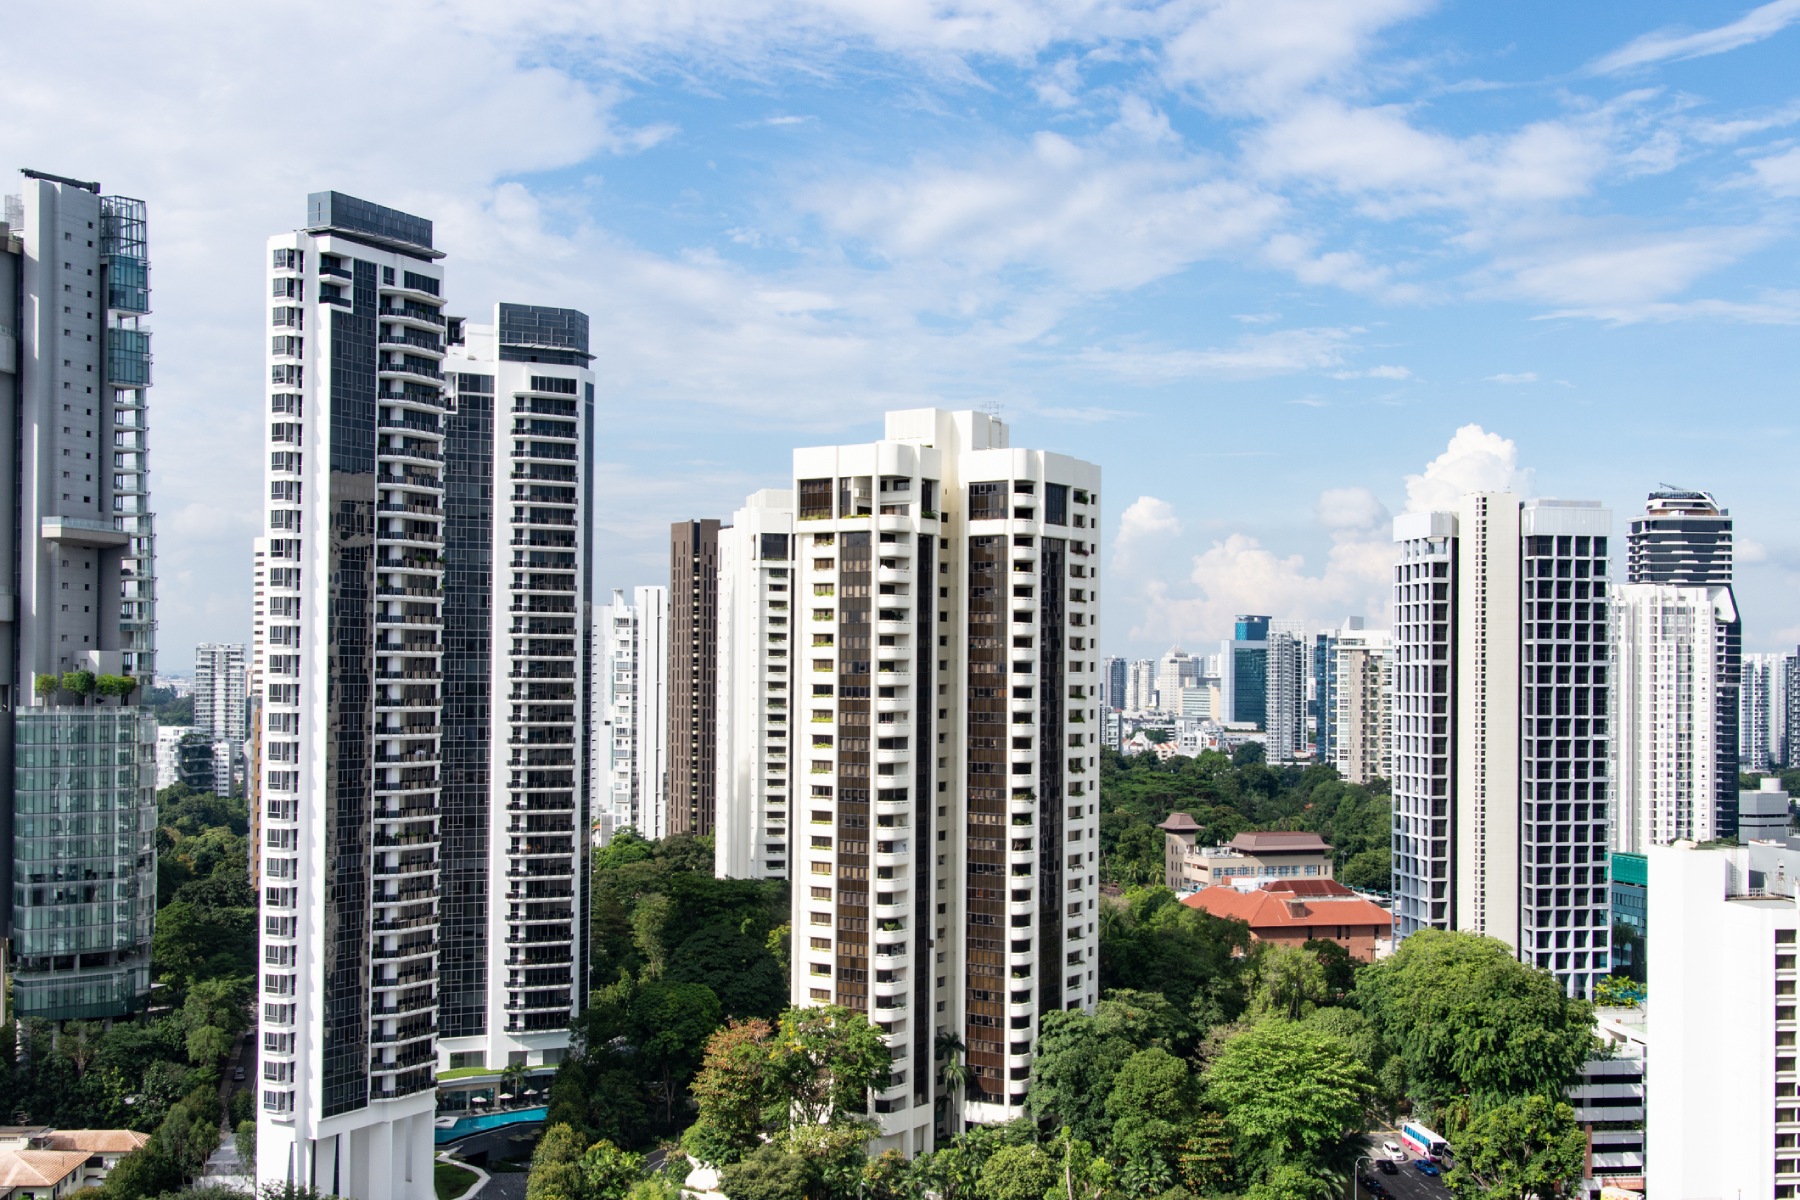 Residential high rises in the Orchard district of Singapore.